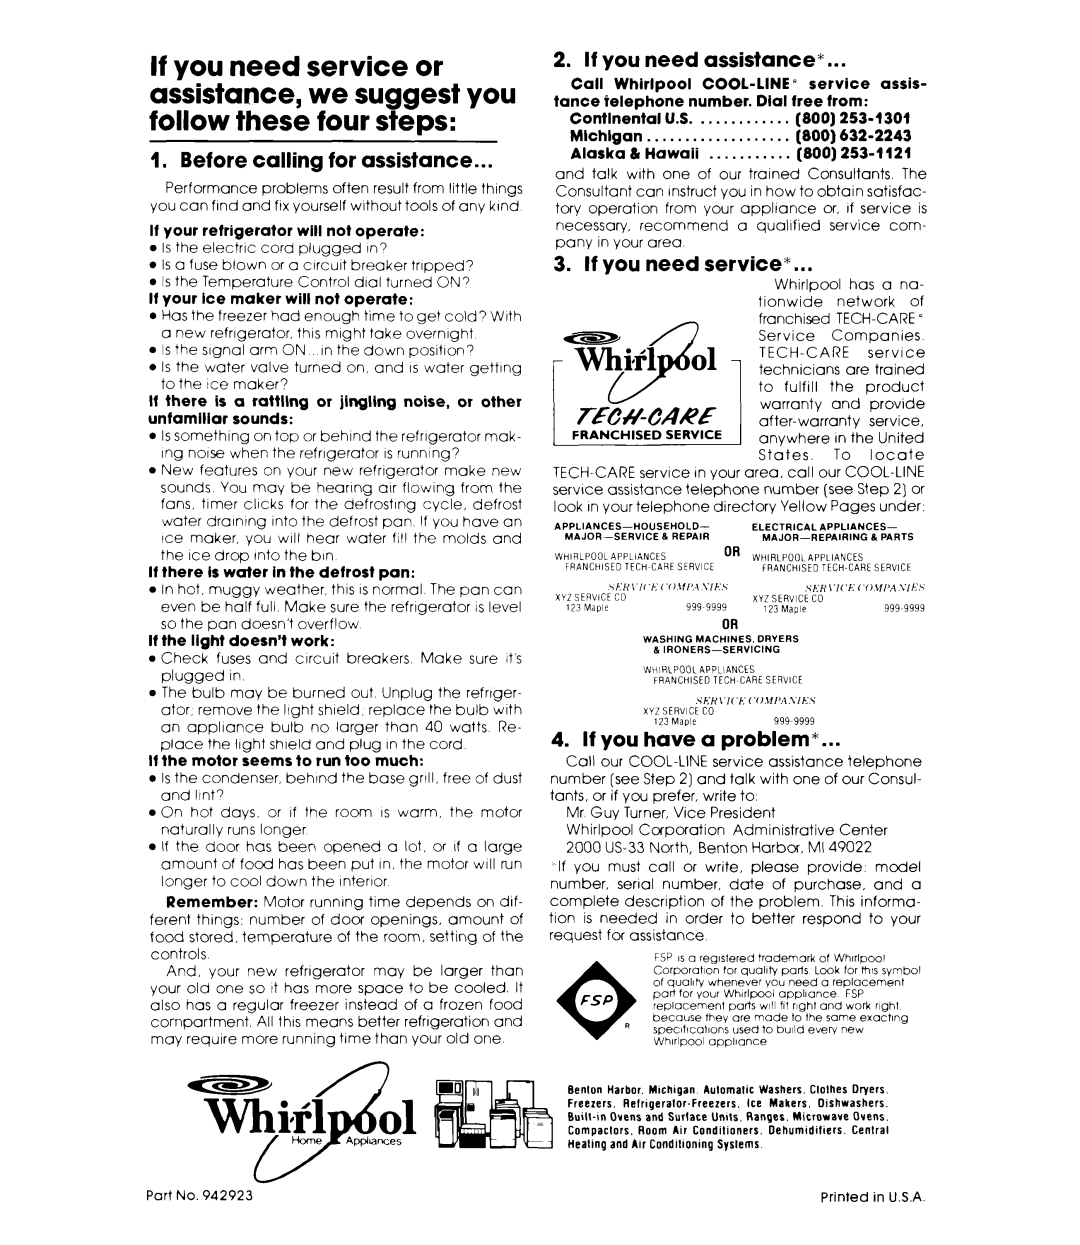 Whirlpool ET16AKXL warranty I. Before calling for assistance, If you need assistance, If you have a problem, service 